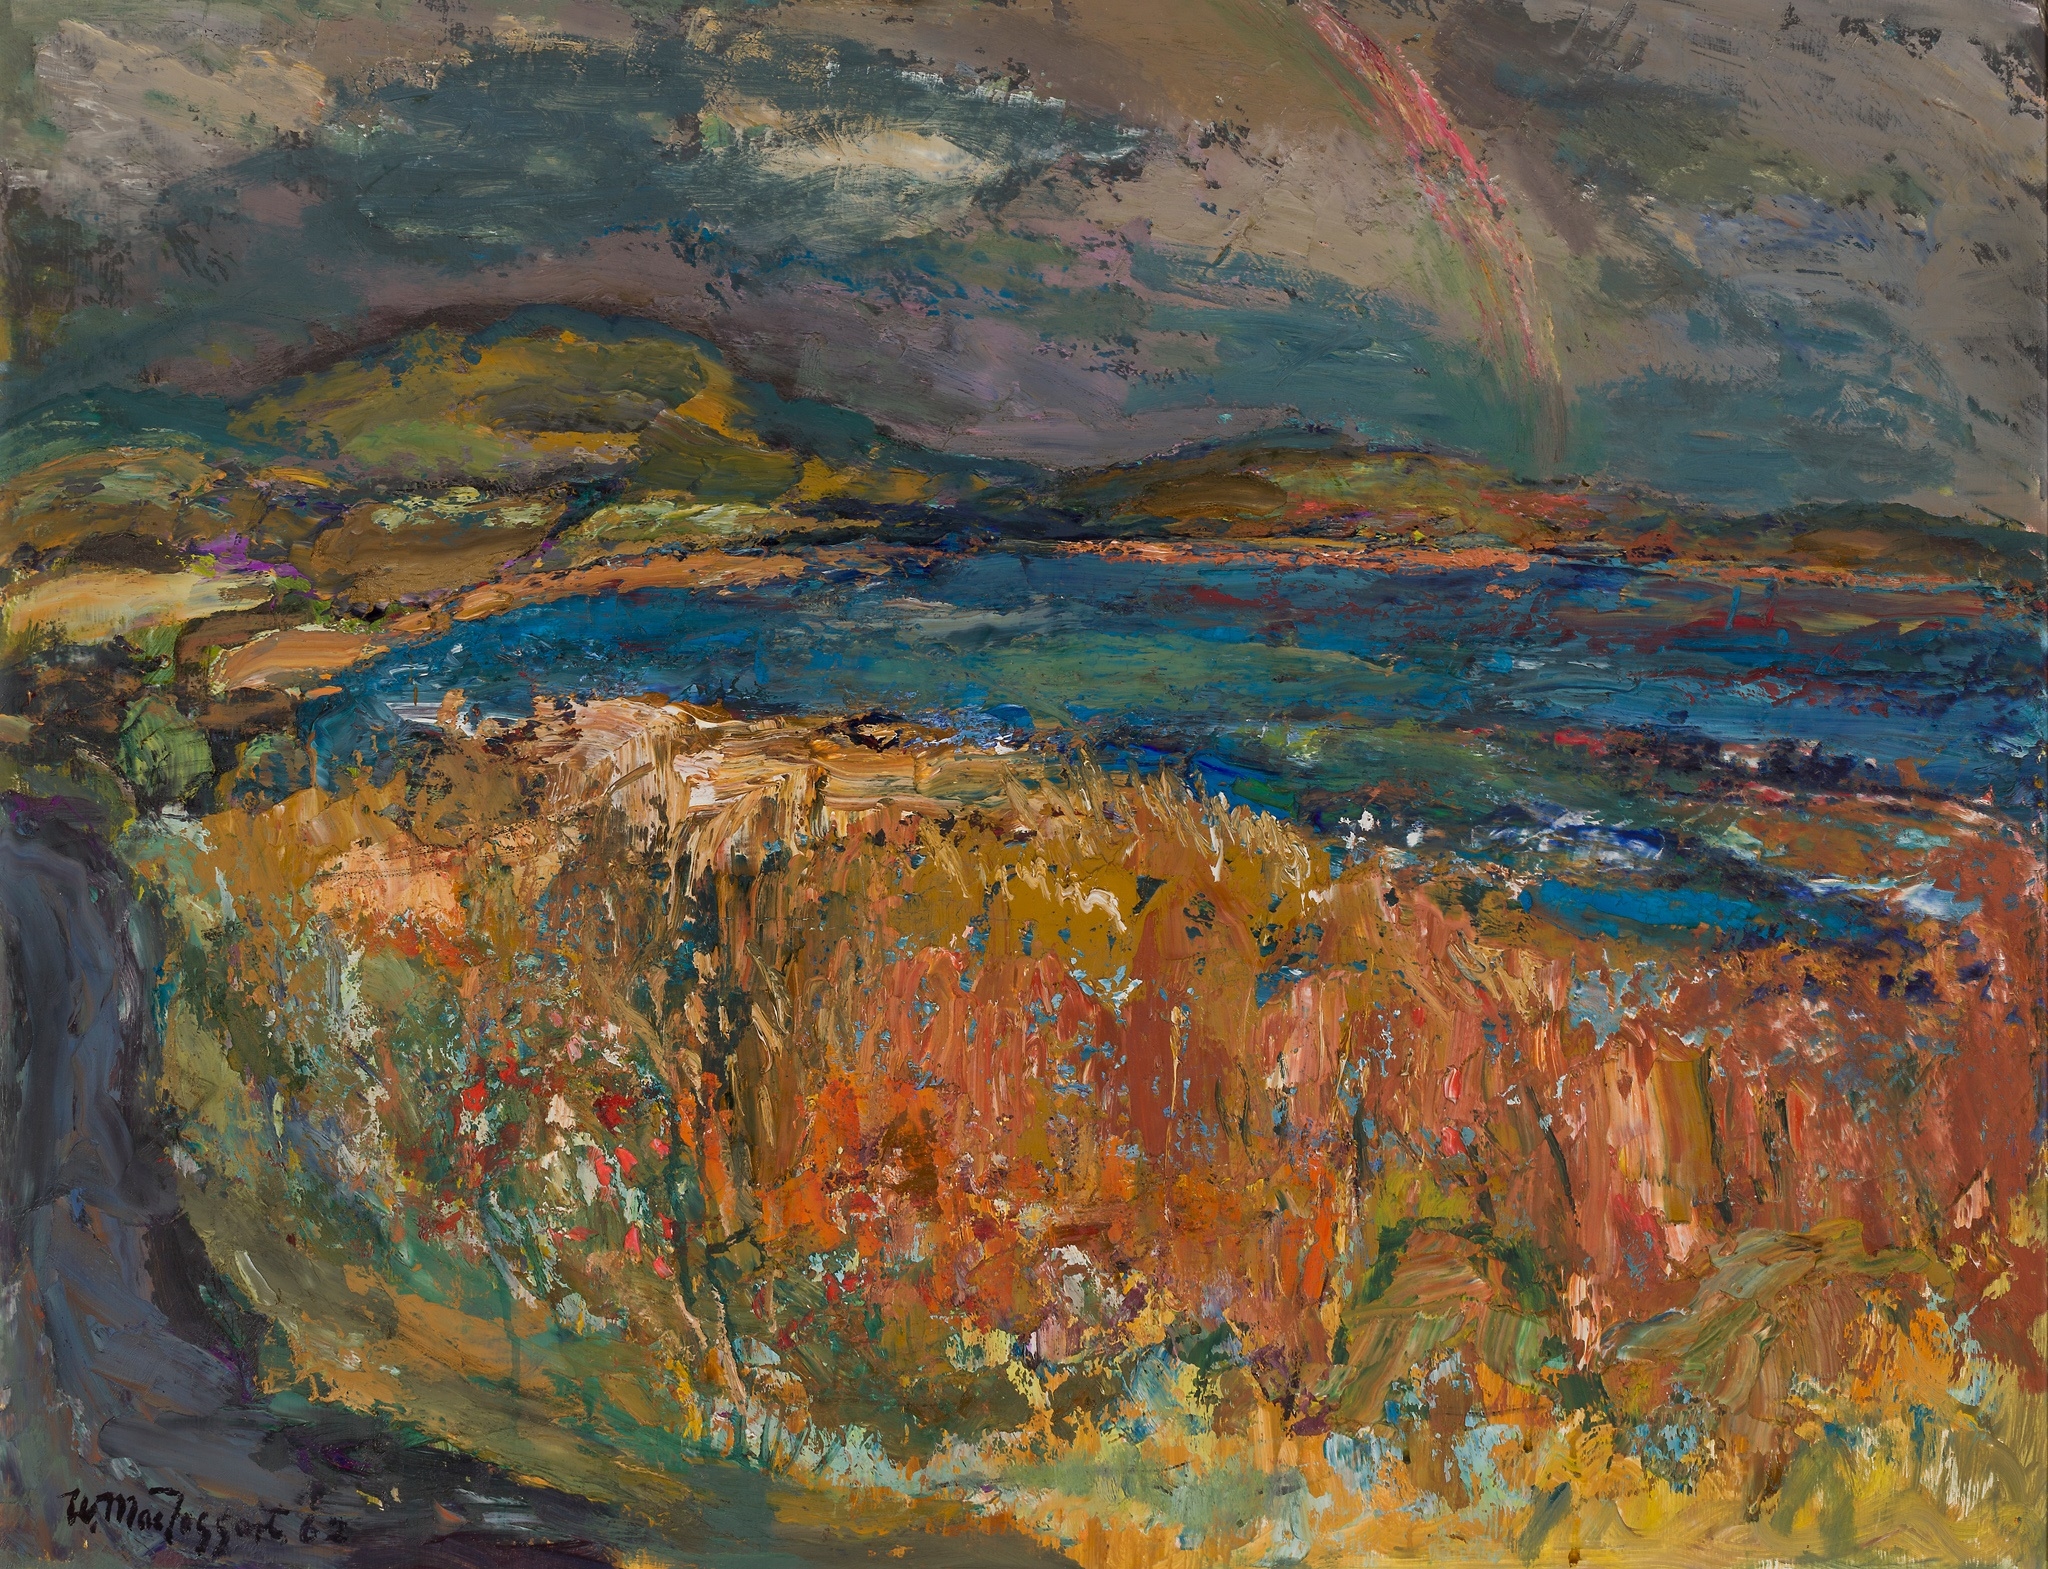 HARVEST-TIME by Sir William MacTaggart, 1960